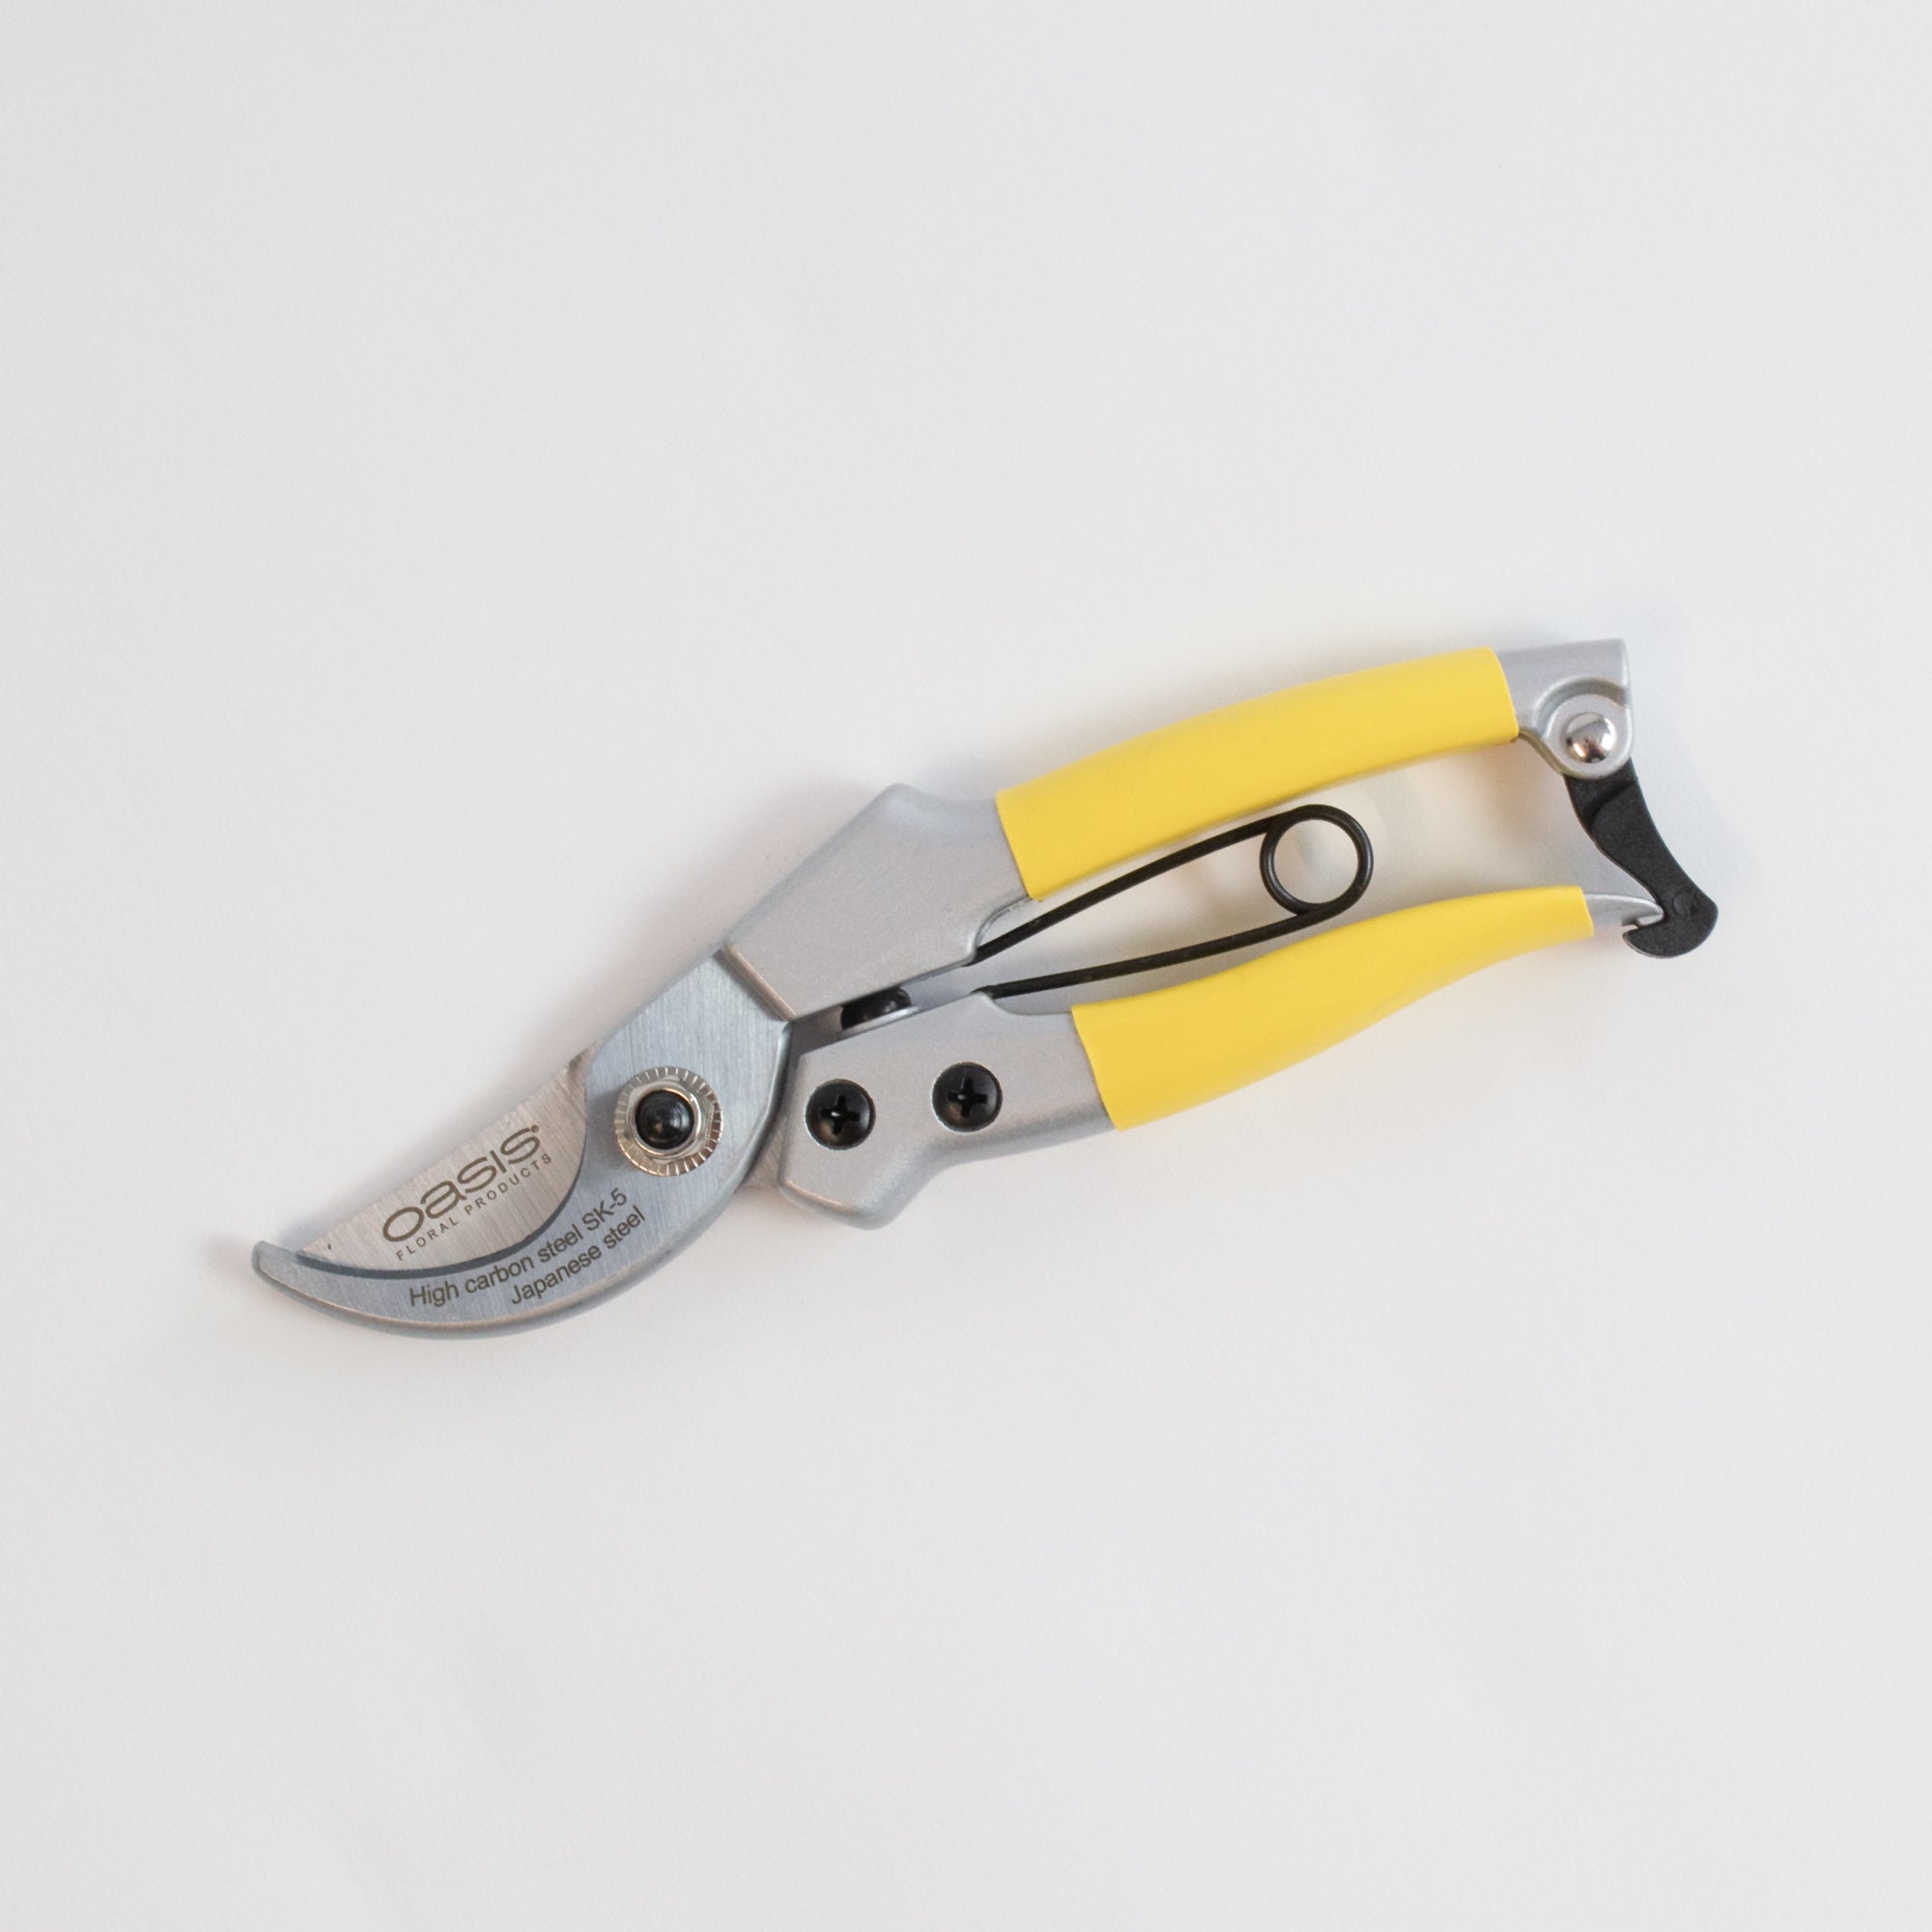 This image shows a set of Carbon Steel Secateurs without packaging, laid on a white background.